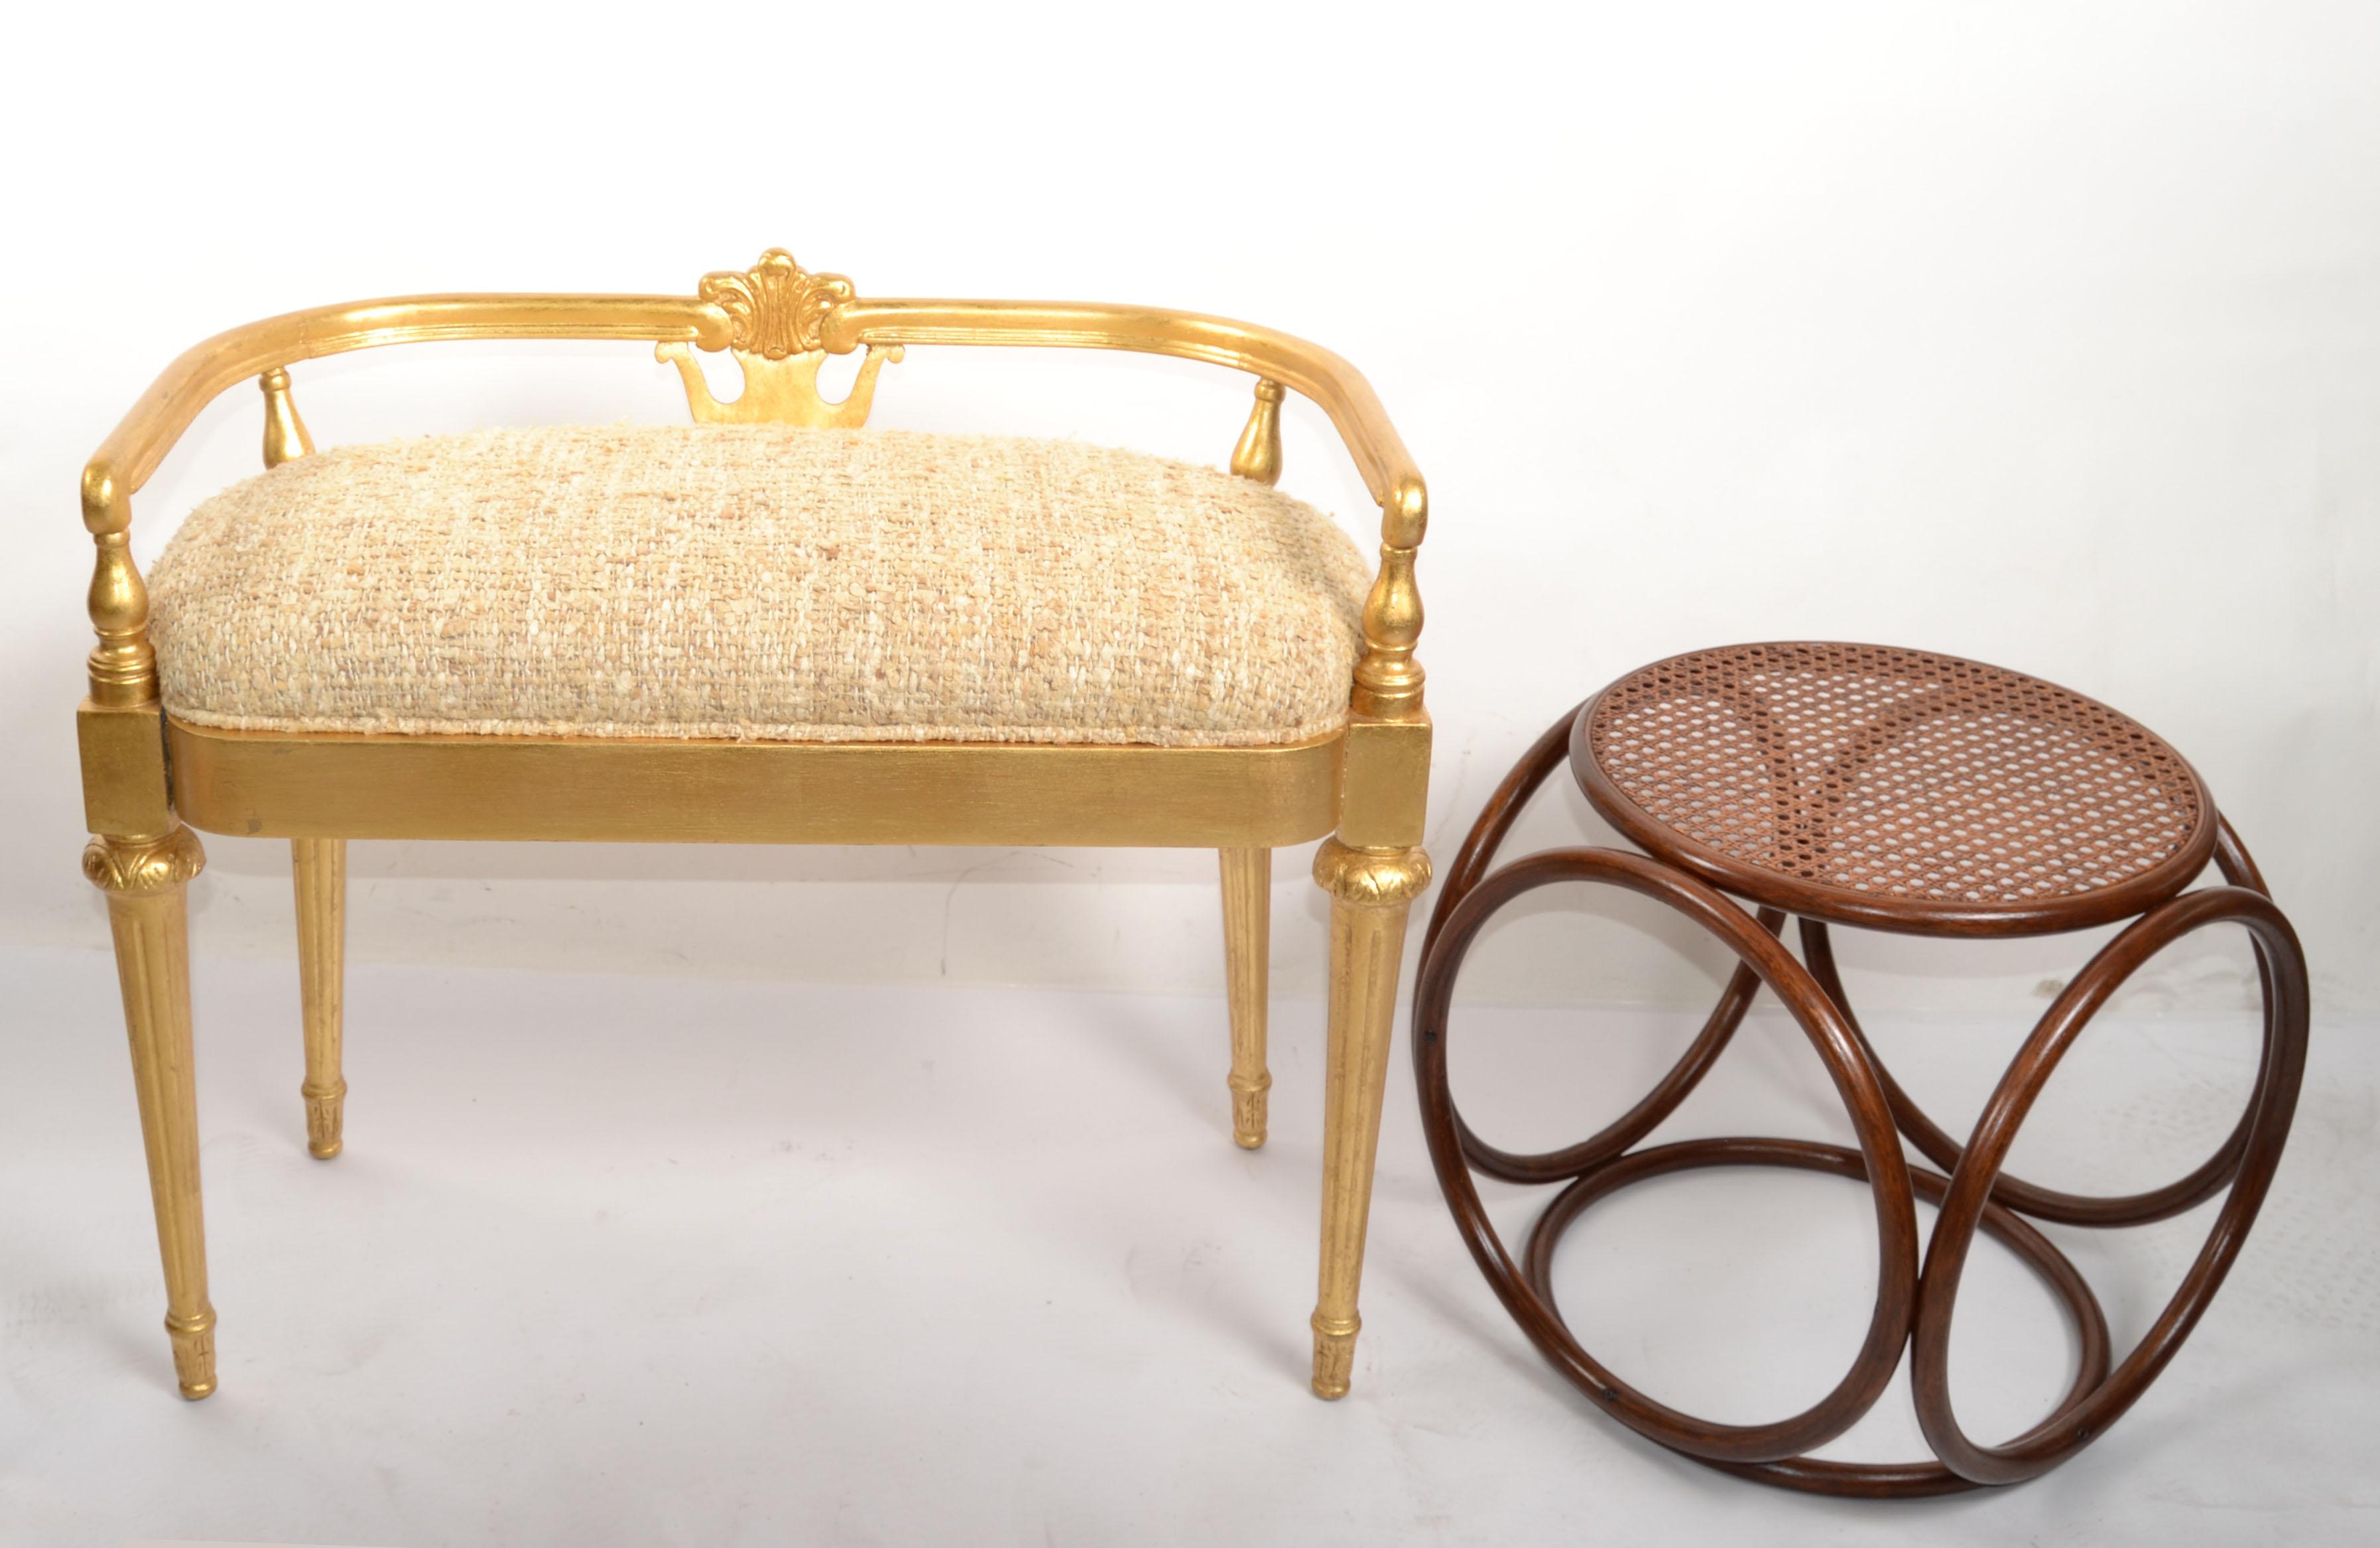 1950s French Louis XIV Style Hand Carved Giltwood Bench Wool Fabric Upholstery For Sale 10